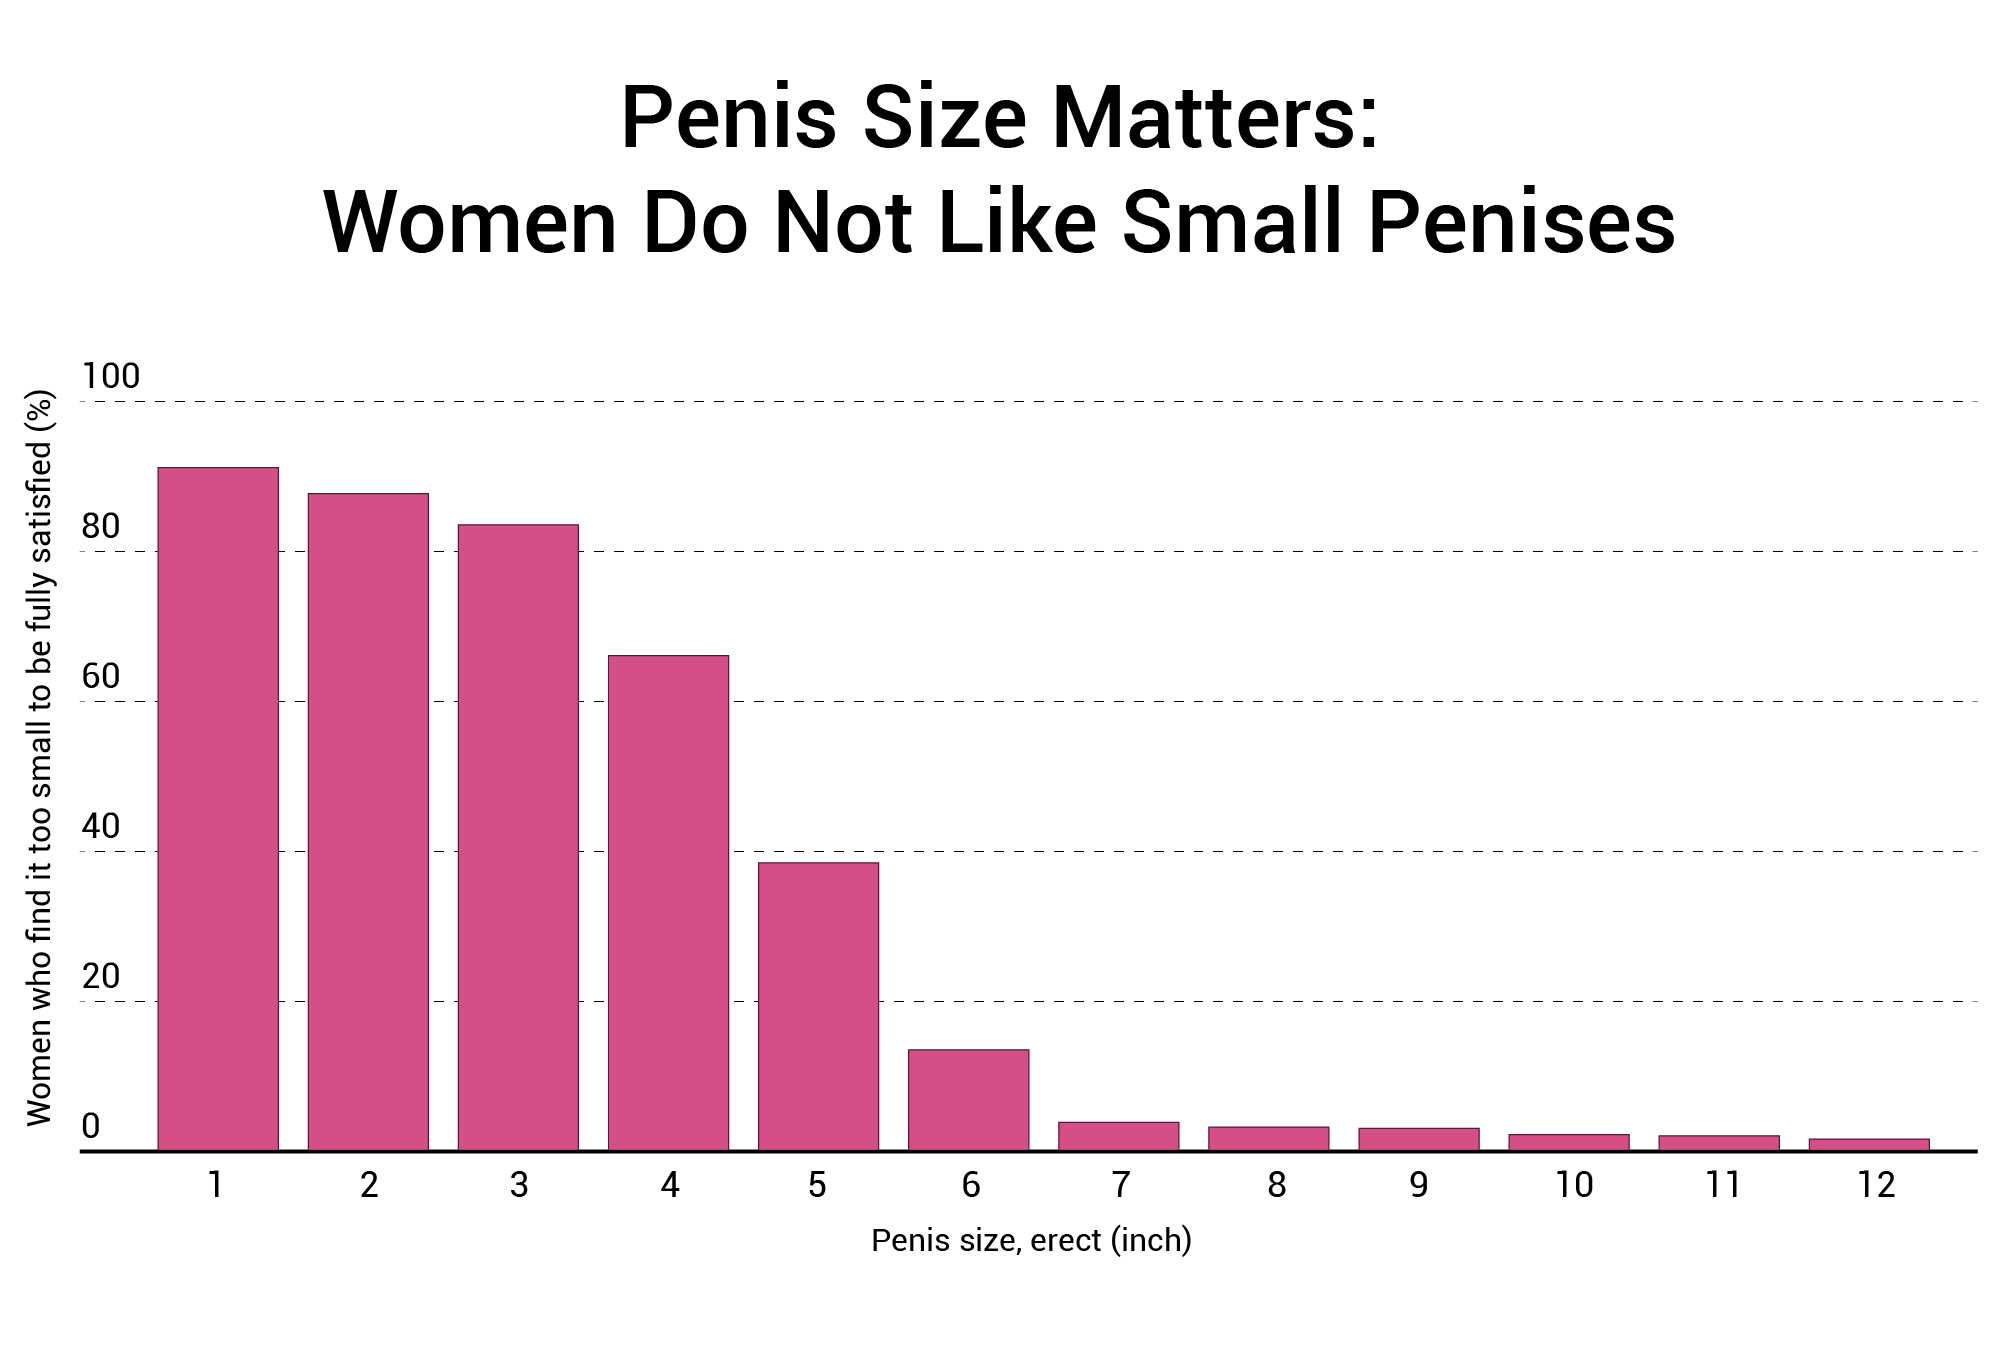 Does Size Matter? 91.7% Of Women Say It